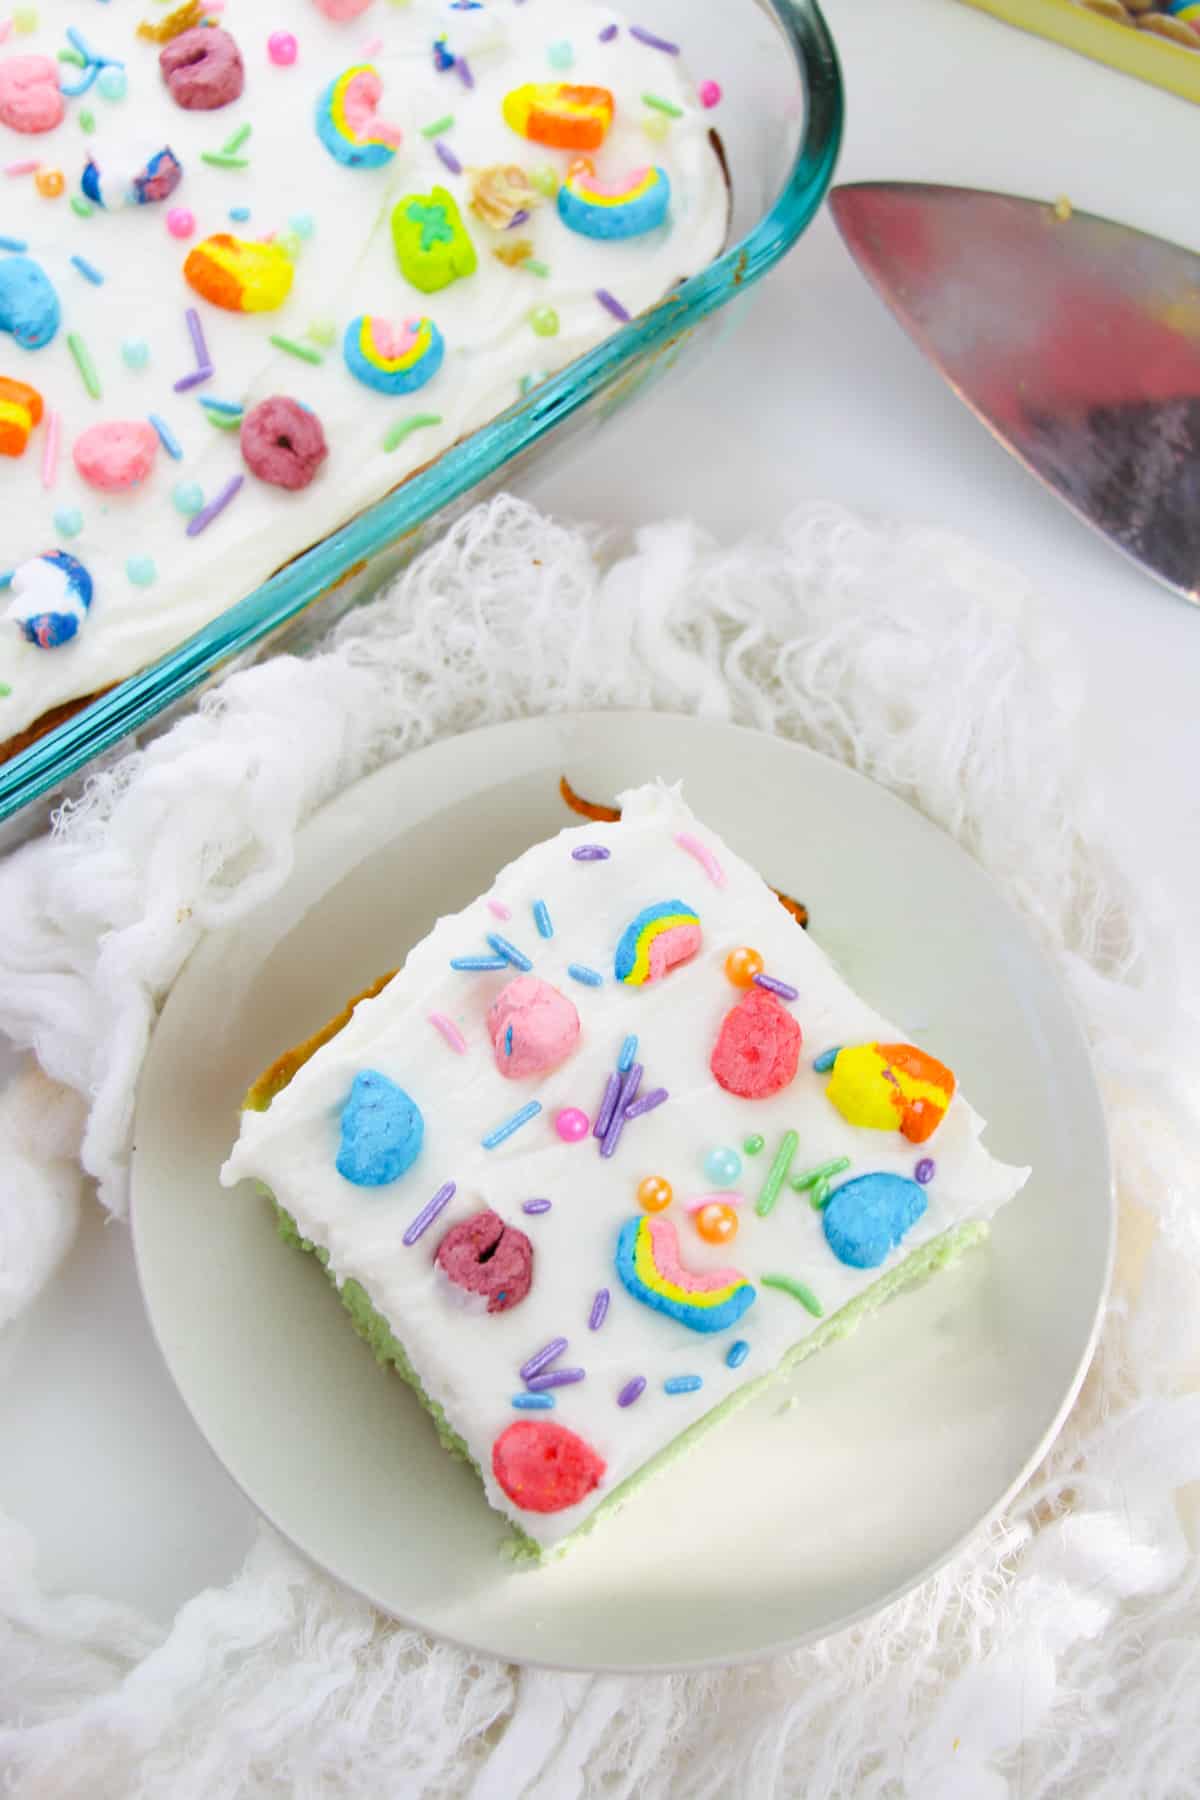 Slice of lucky charms sheet cake with white frosting topped with rainbow sprinkles and lucky charms marshmallows. Whole cake in baking pan can be seen next to the slice.